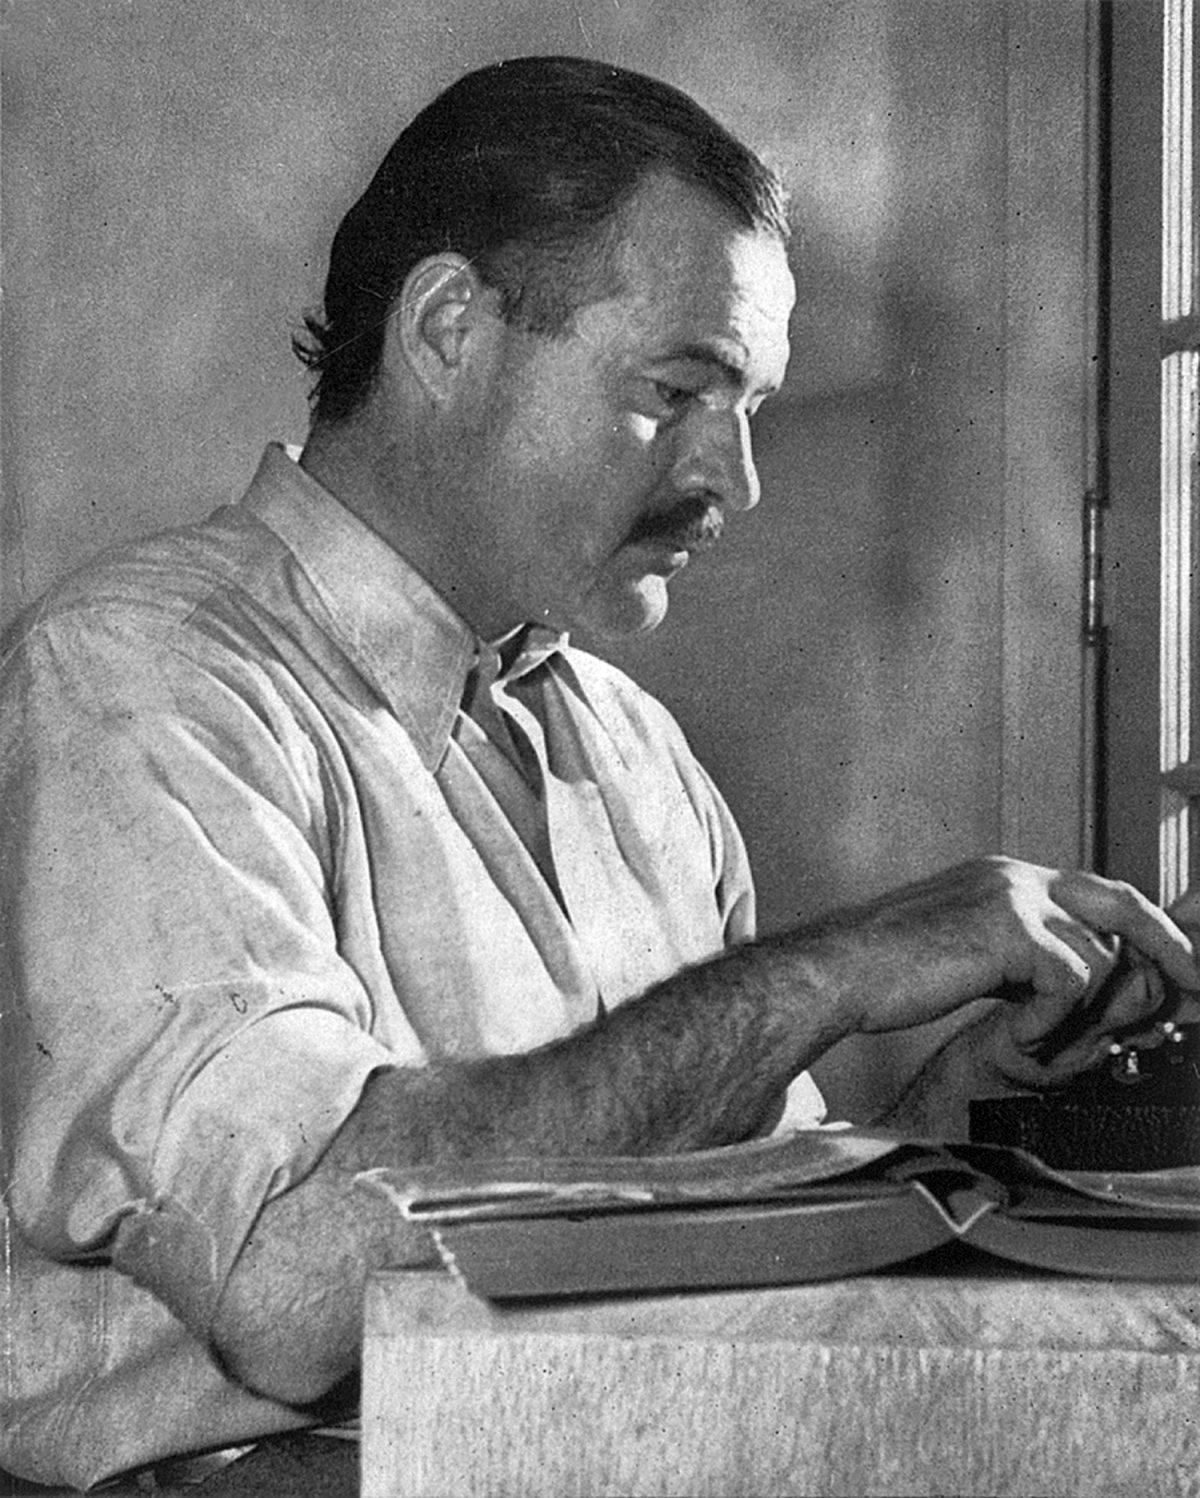 Ernest Hemingway, pictured here in 1939, used some of the rhythms of the King James Bible in his novels and short stories. (Public Domain)